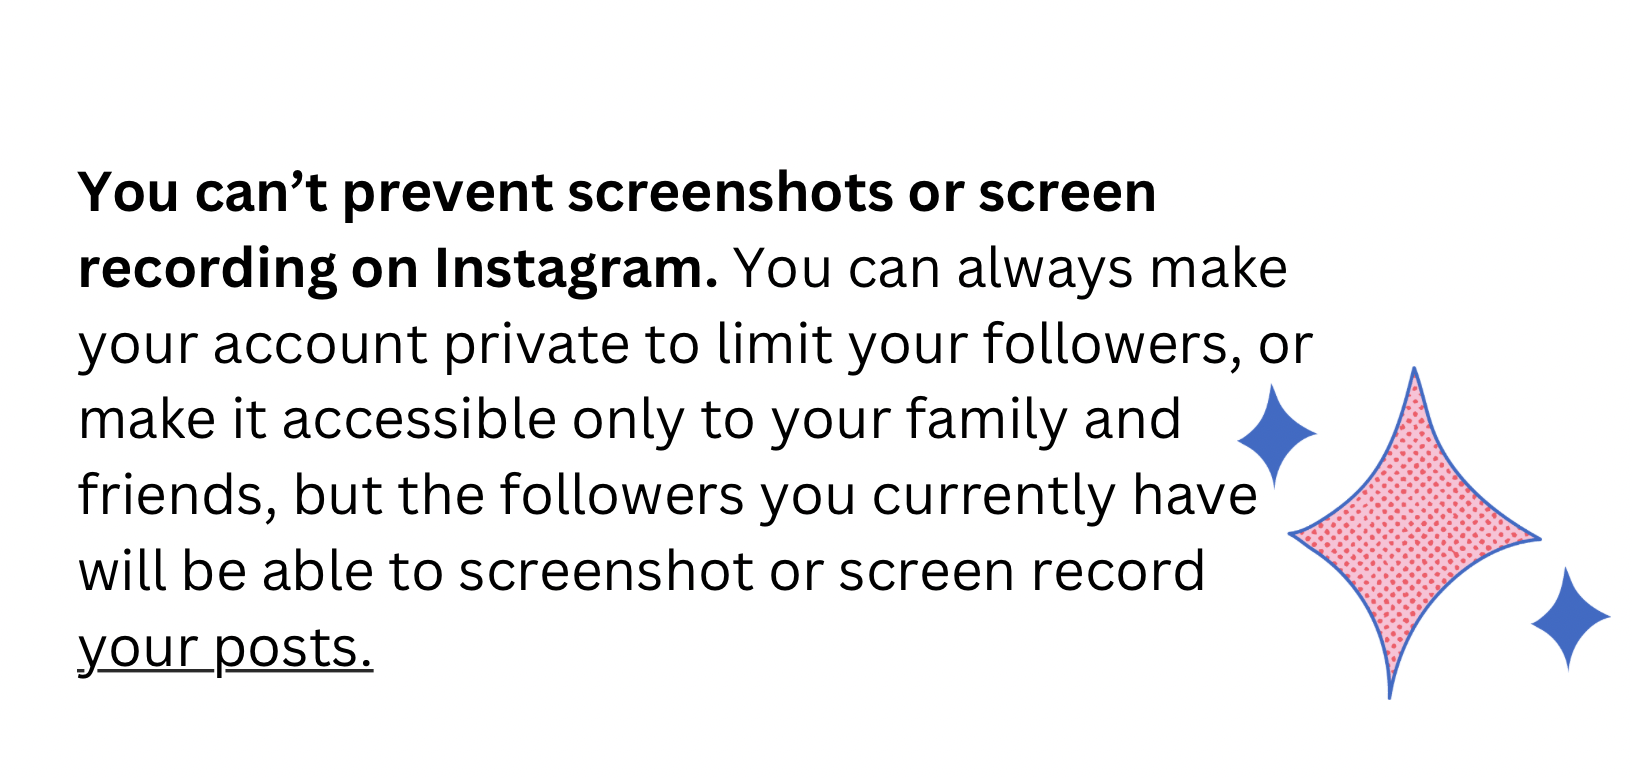 Does Instagram Notify Users About Screenshots